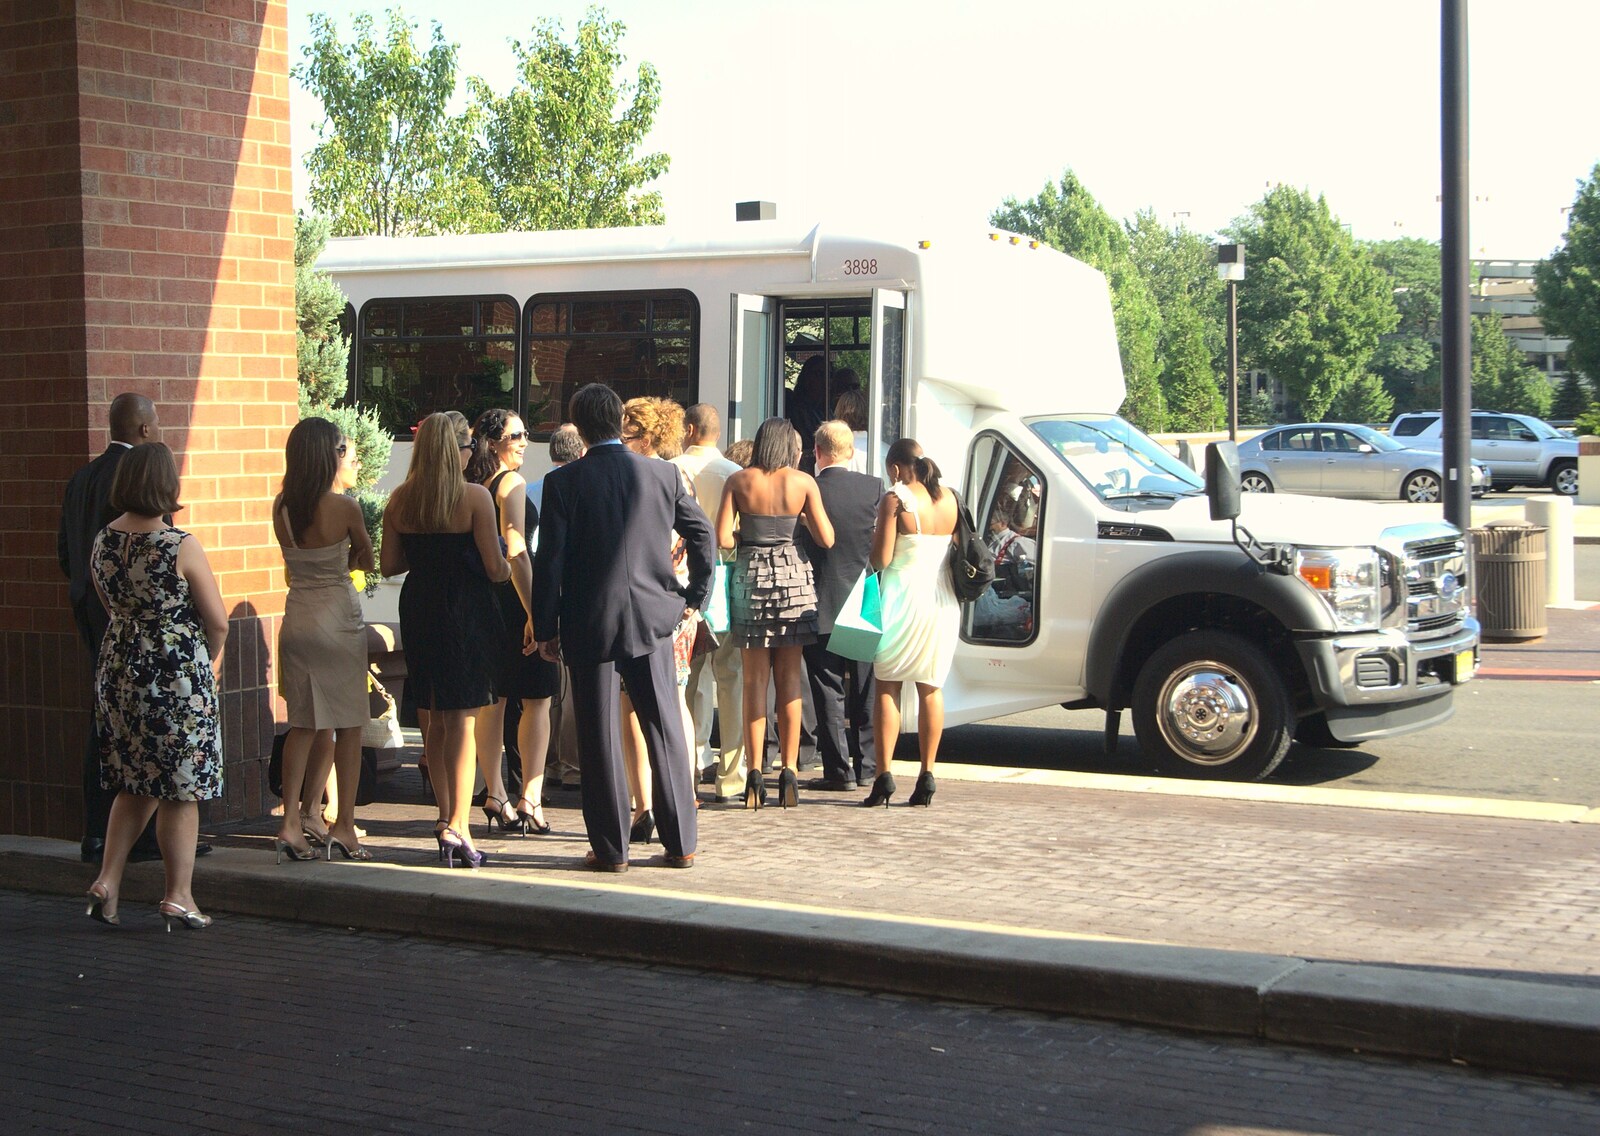 The bus loads up from Phil and Tania's Wedding, Short Hills, New Jersey, USA - 20th August 2011